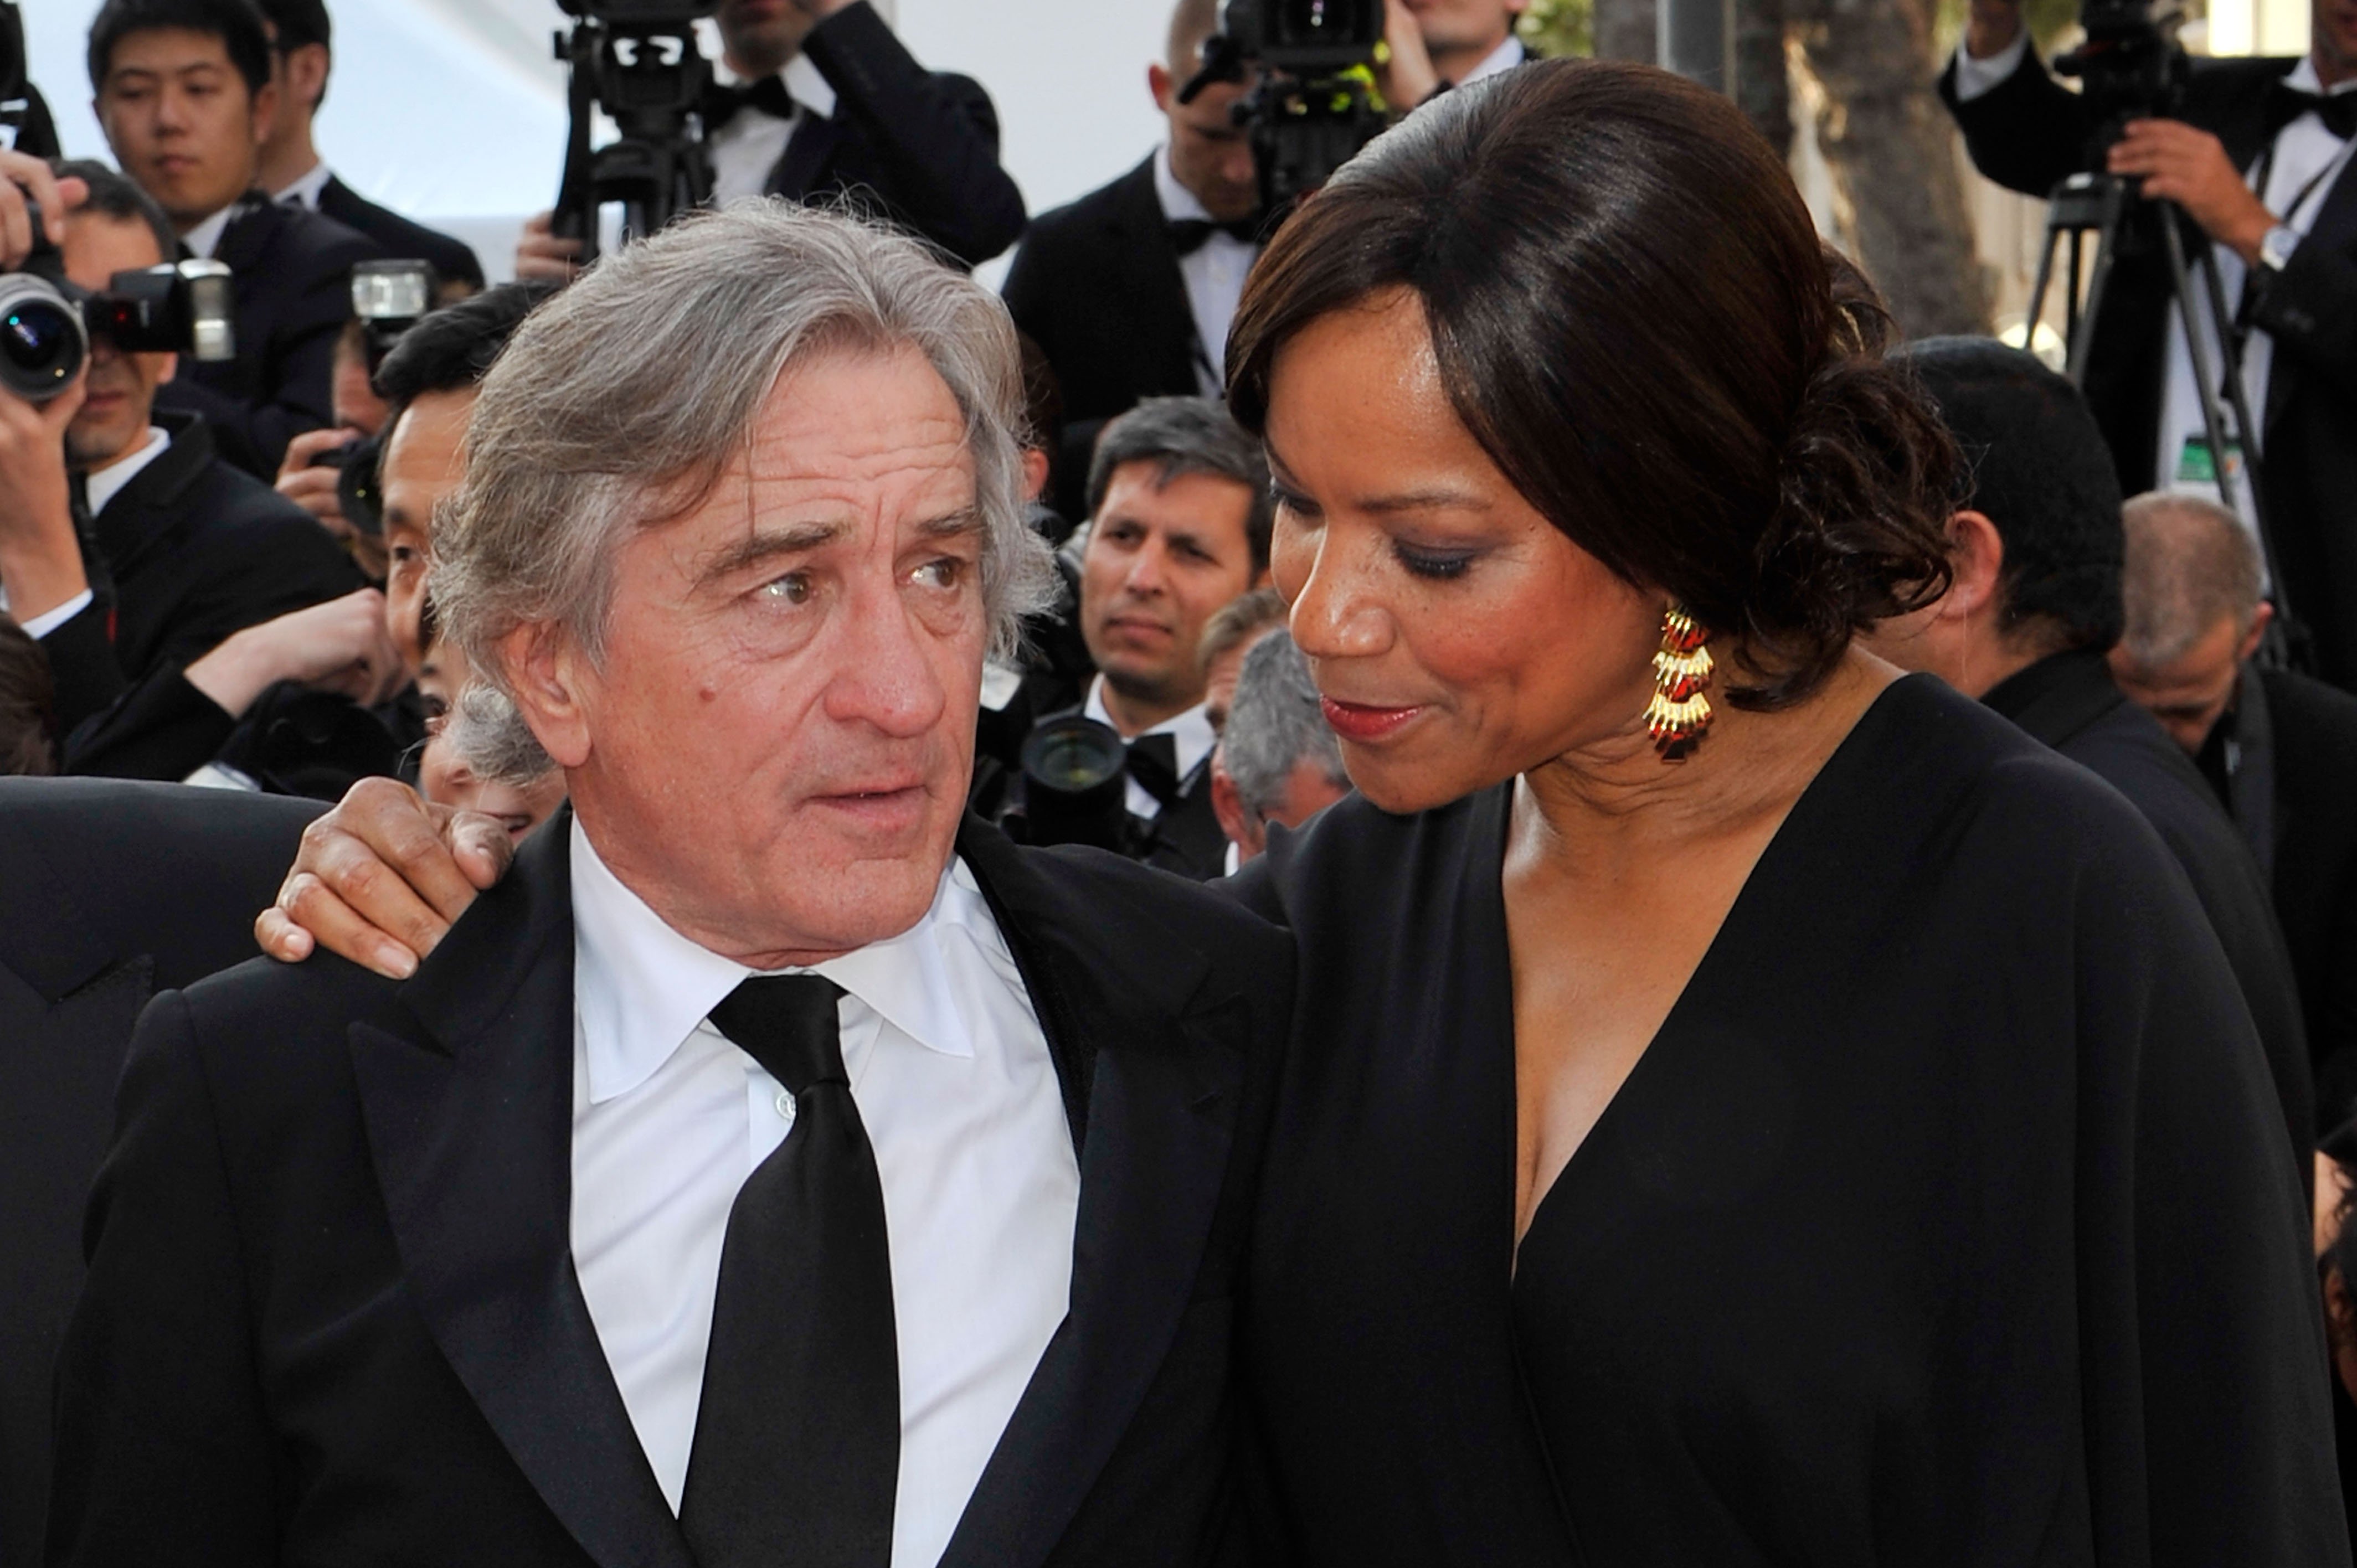 Robert De Niro and Grace Hightower attend the "Once Upon A Time" premiere during the 65th Annual Cannes Film Festival at Palais des Festivals on May 18, 2012 in Cannes, France | Source: Getty Images